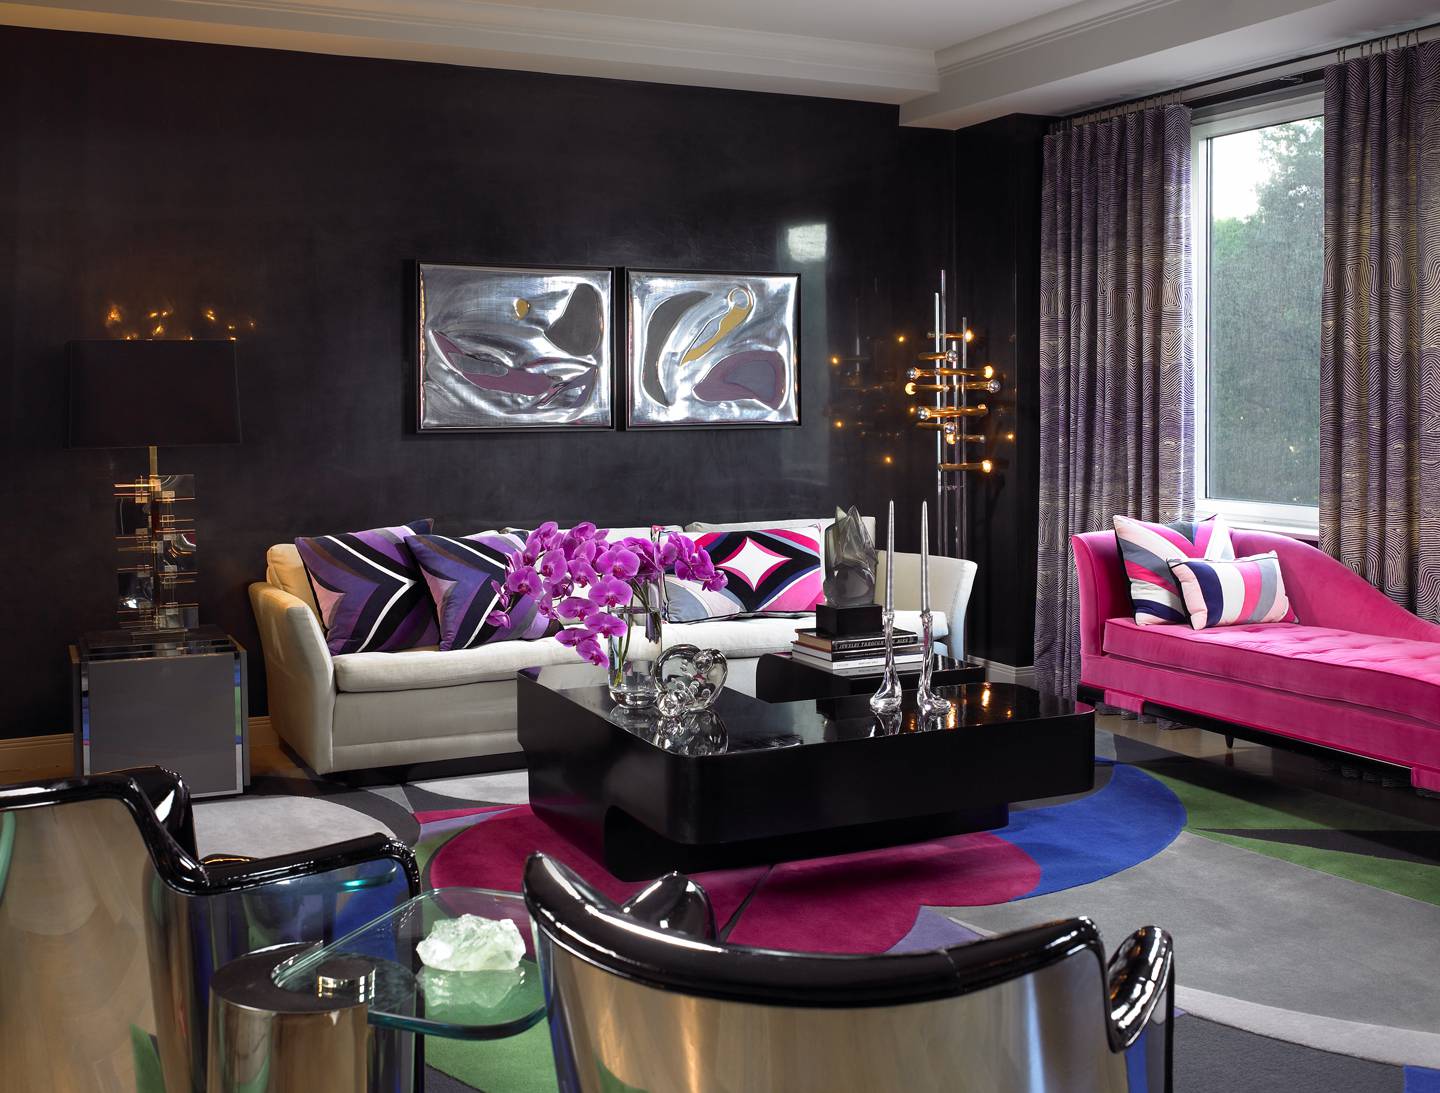 Discover Our Selection of Top Interior Design Projects by Amy Lau